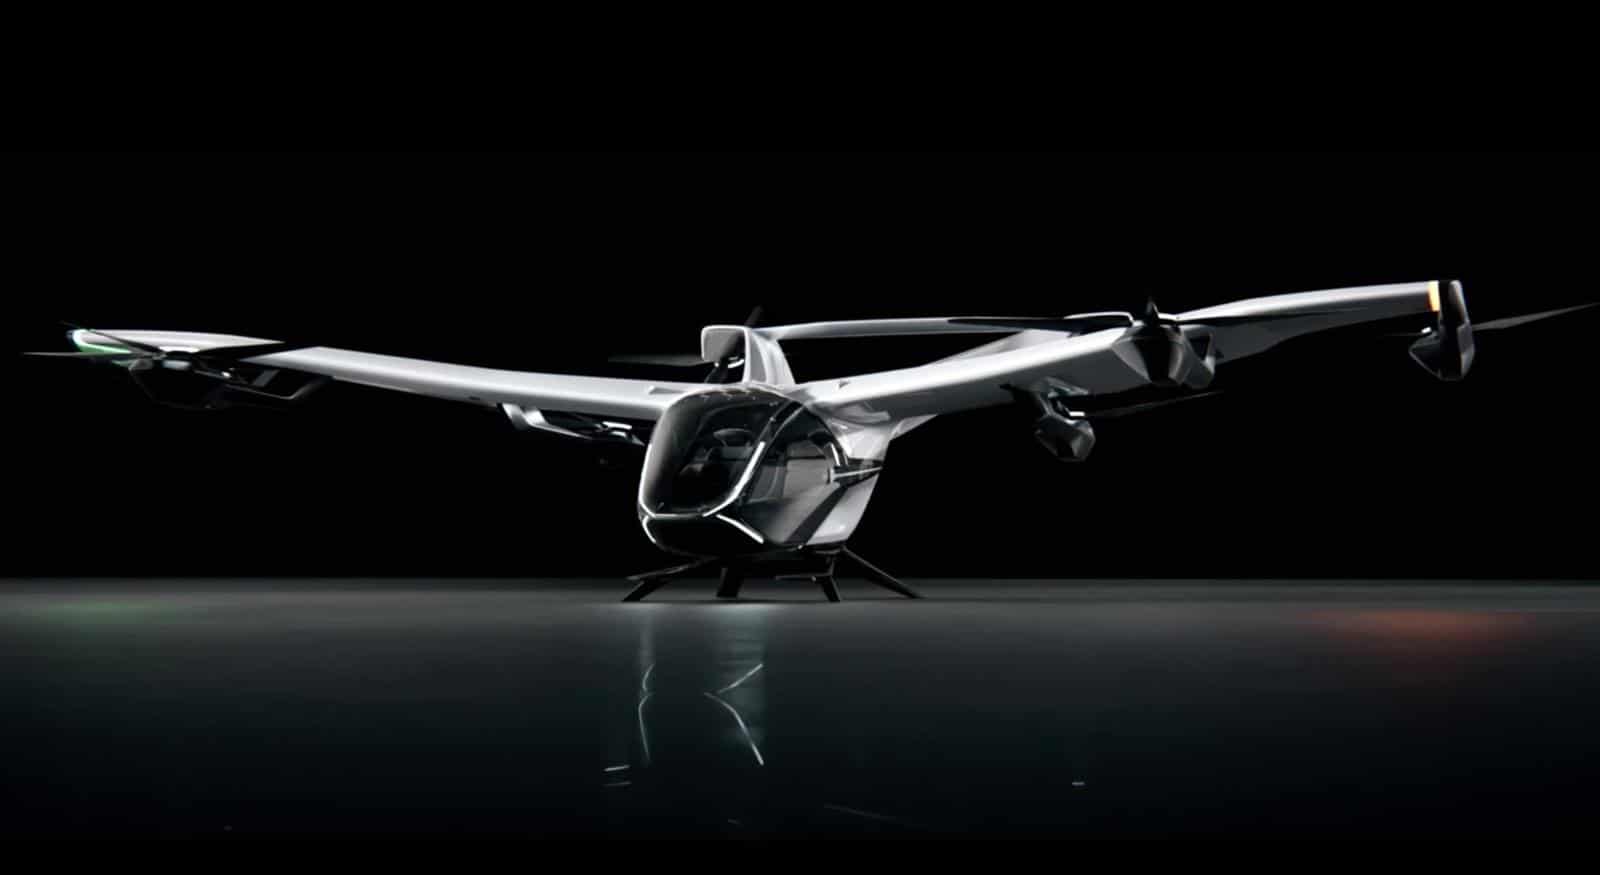 The new generation Airbus electric flying taxi, the CityAirbus